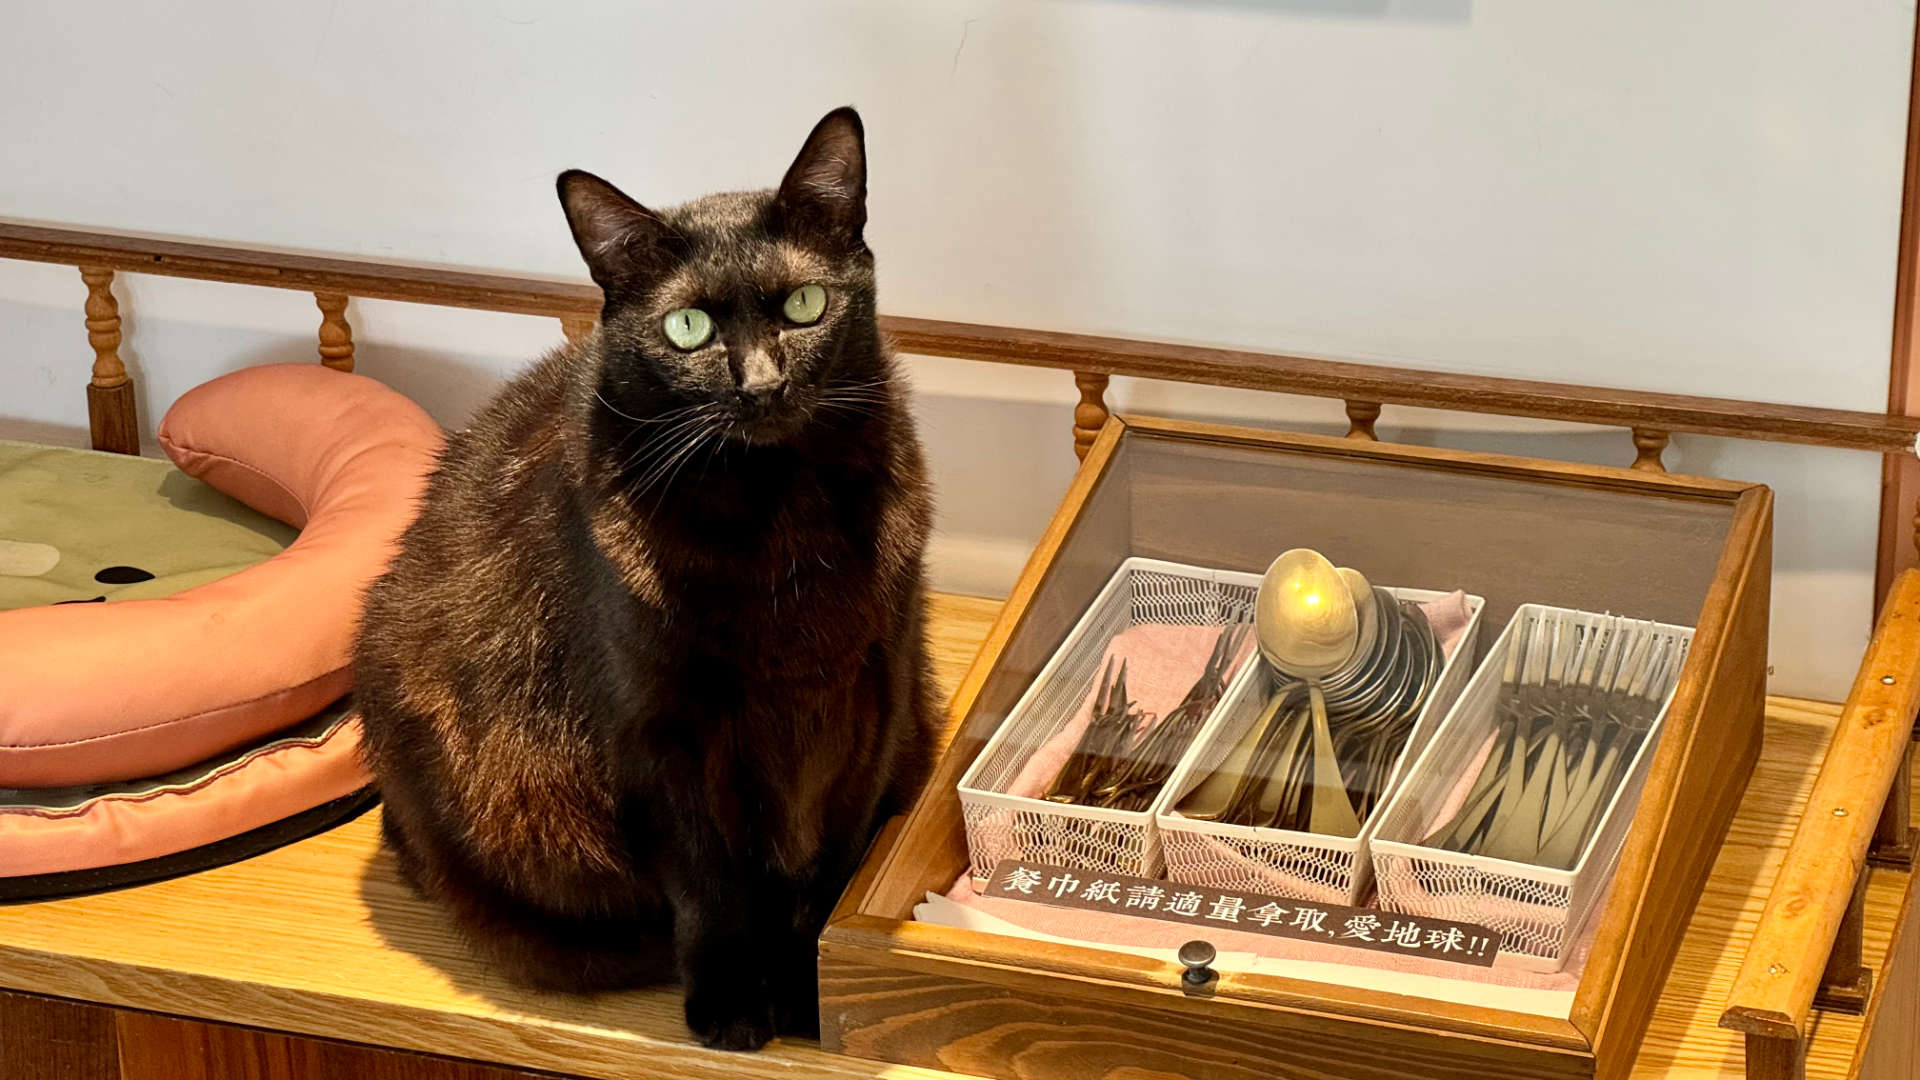 A black cat sitting next to a box of cutlery.